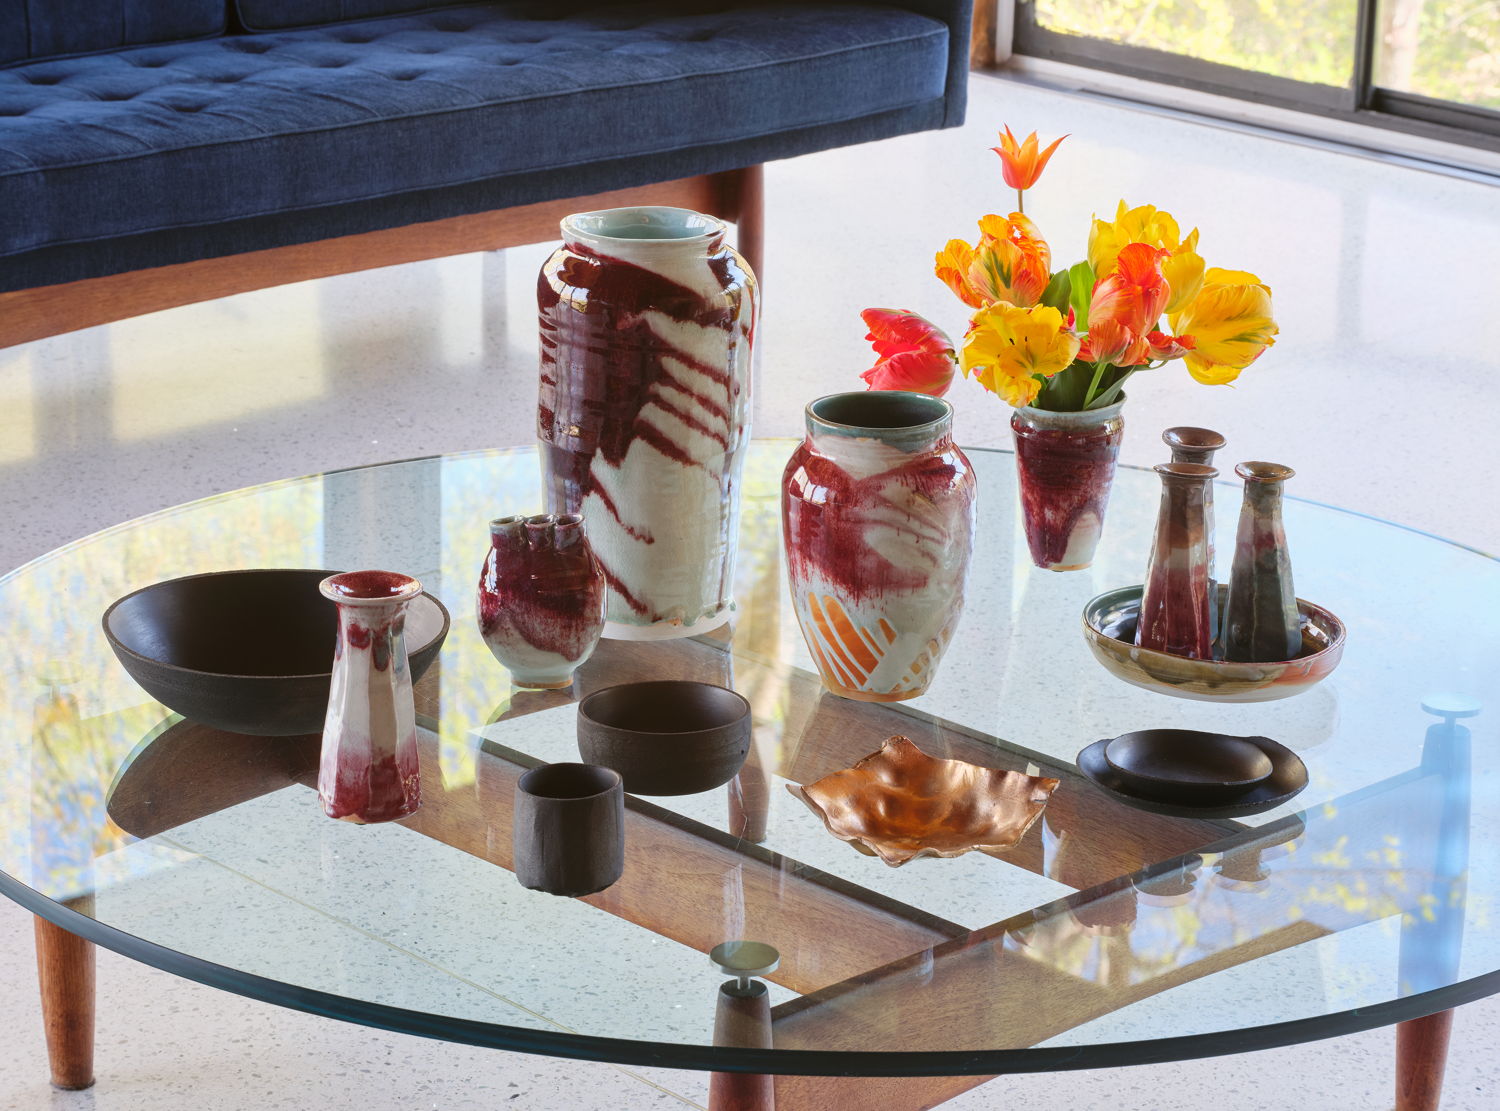 Works pictured: Gerald Luss, Coffee Table for The Gerald Luss House (c. 1950s); micaceous clay vessels by Johnny Ortiz (2021); porcelain vases by Frances Palmer (2021); Alma Allen bronze dish, Not Yet Titled (2019).